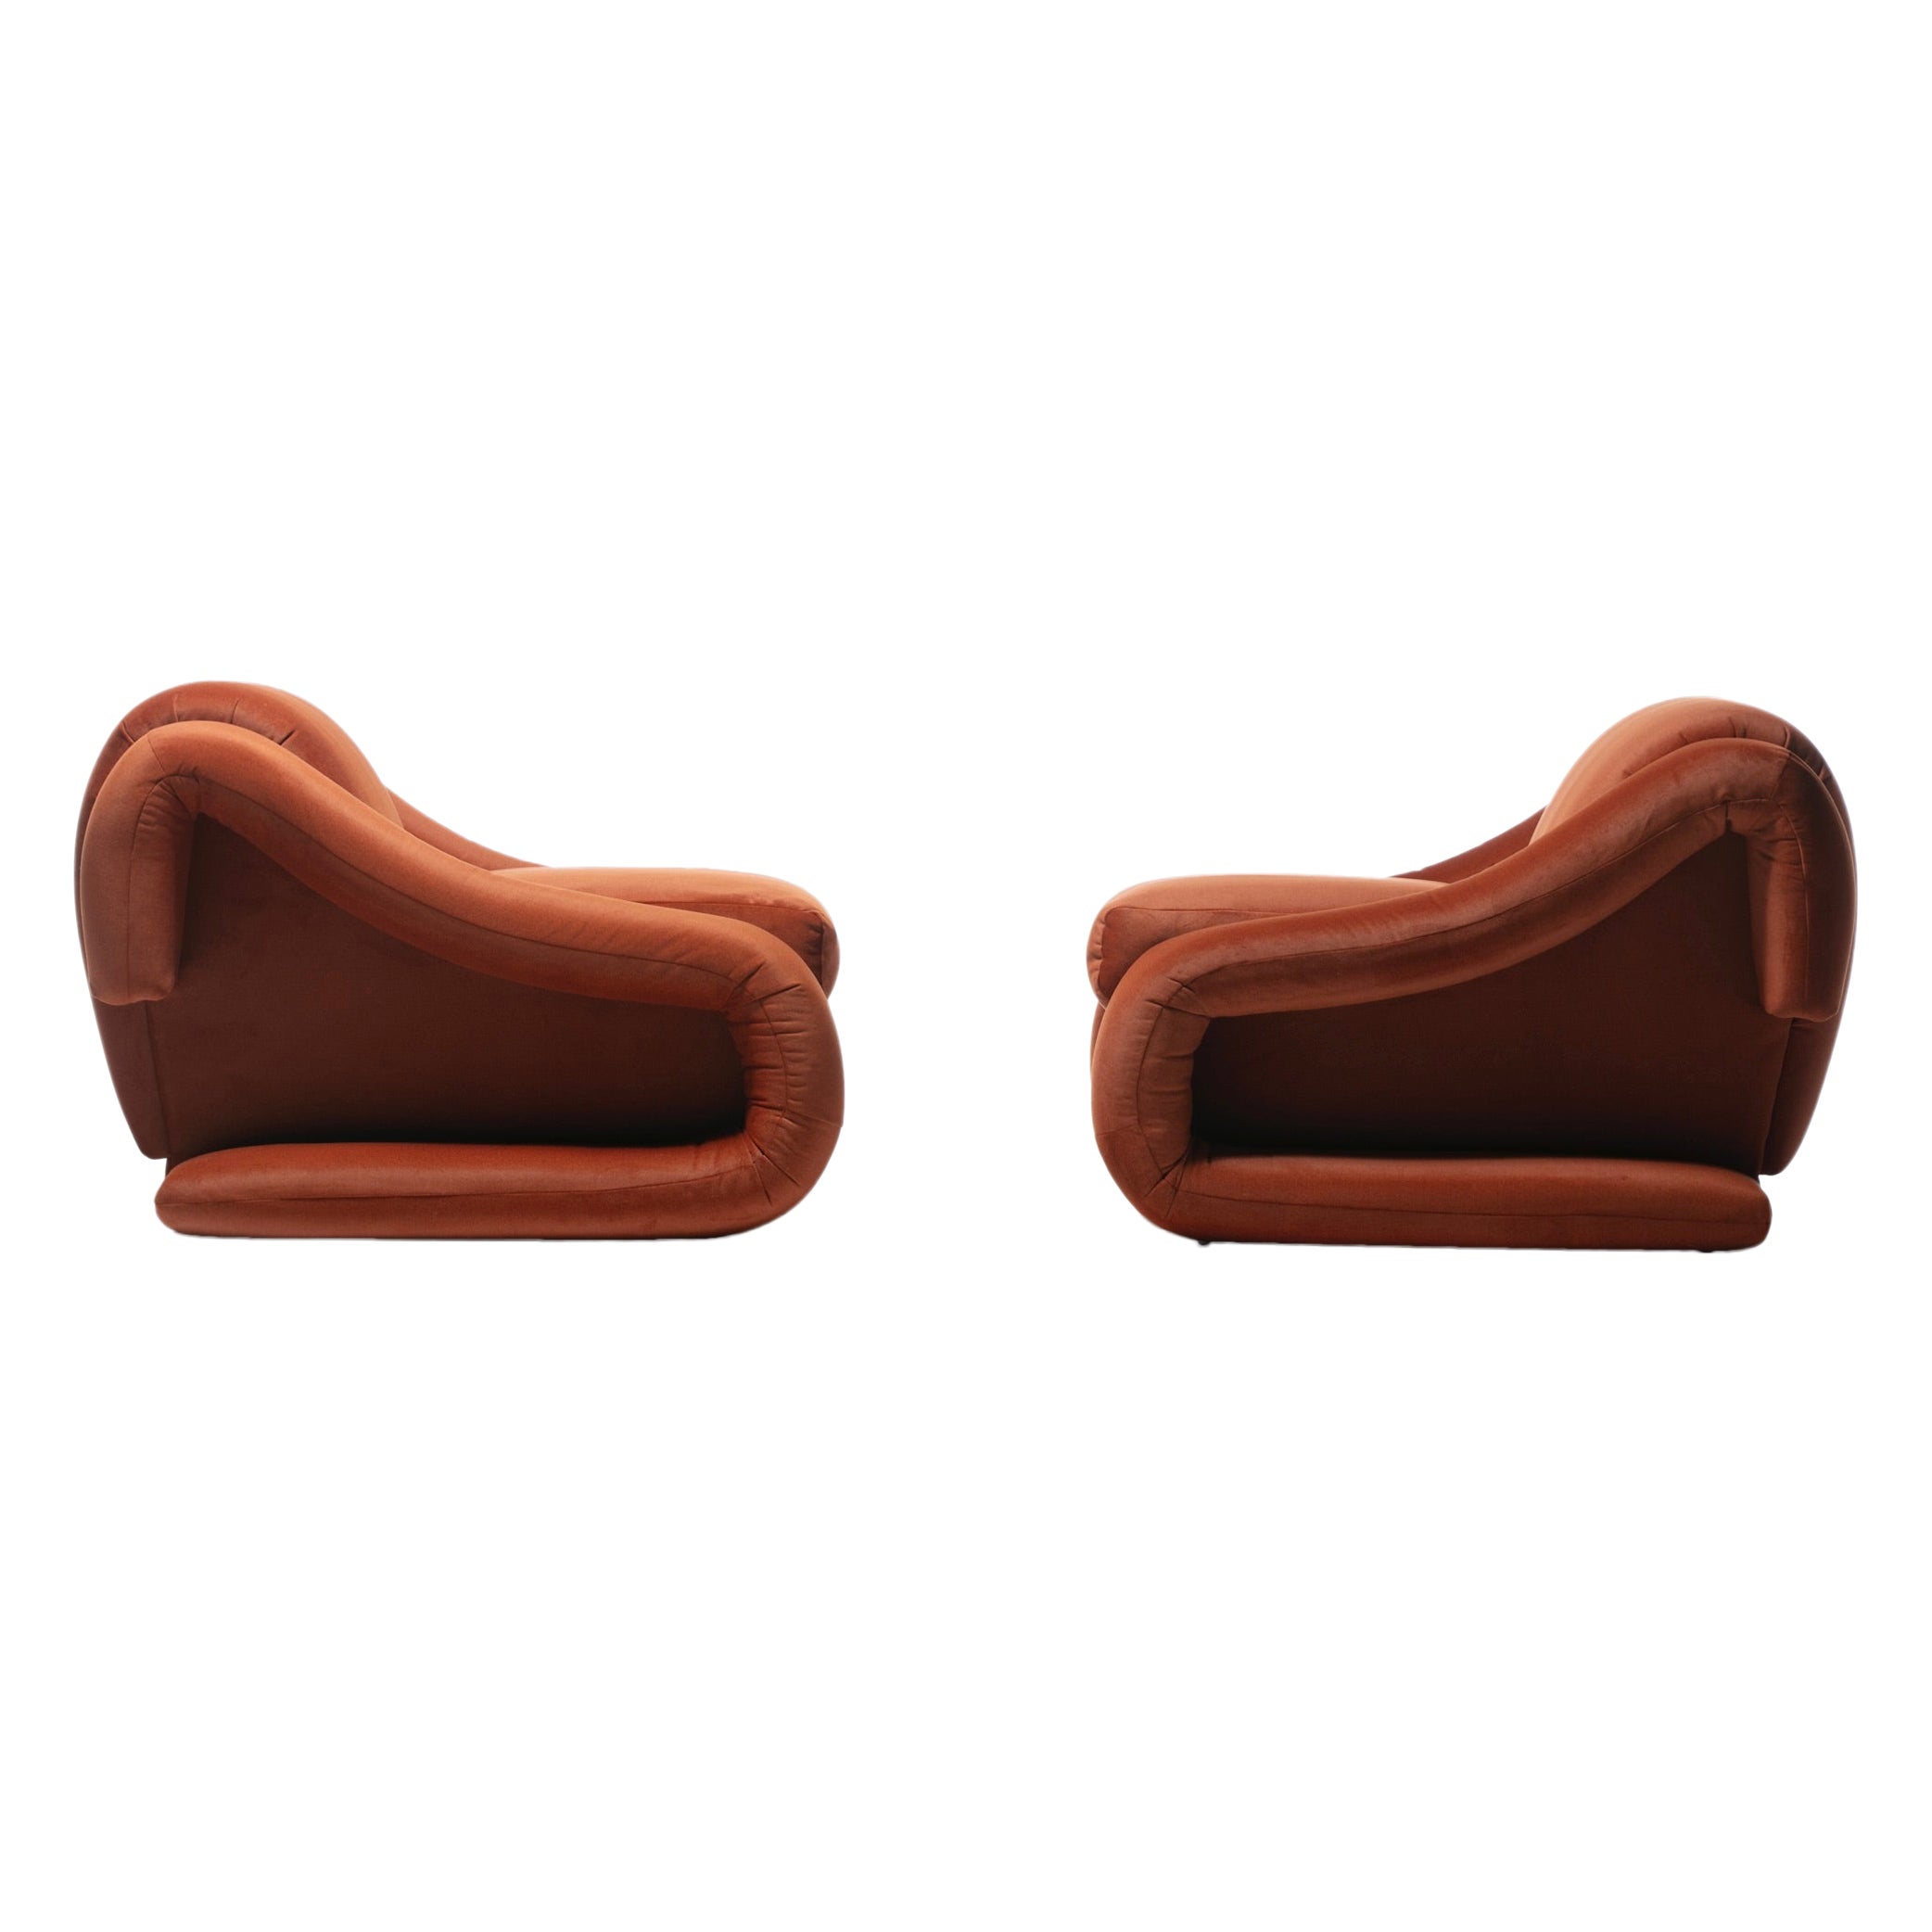 Monumental Post Modern Pair of Weiman Lounge Chairs in Marmalade Orange Fabric For Sale